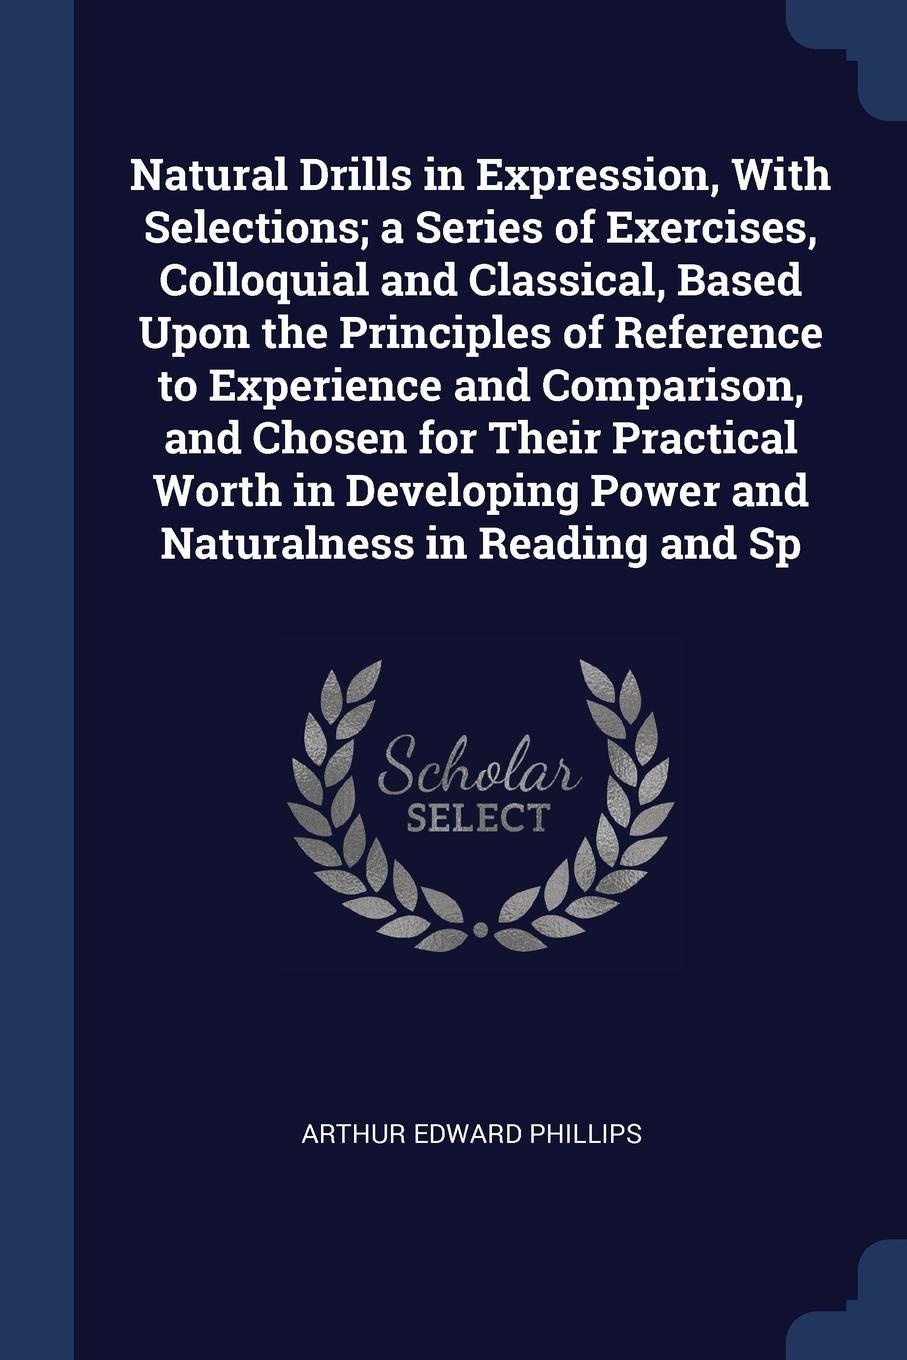 Natural Drills in Expression, With Selections; a Series of Exercises, Colloquial and Classical, Based Upon the Principles of Reference to Experience and Comparison, and Chosen for Their Practical Worth in Developing Power and Naturalness in Readin...